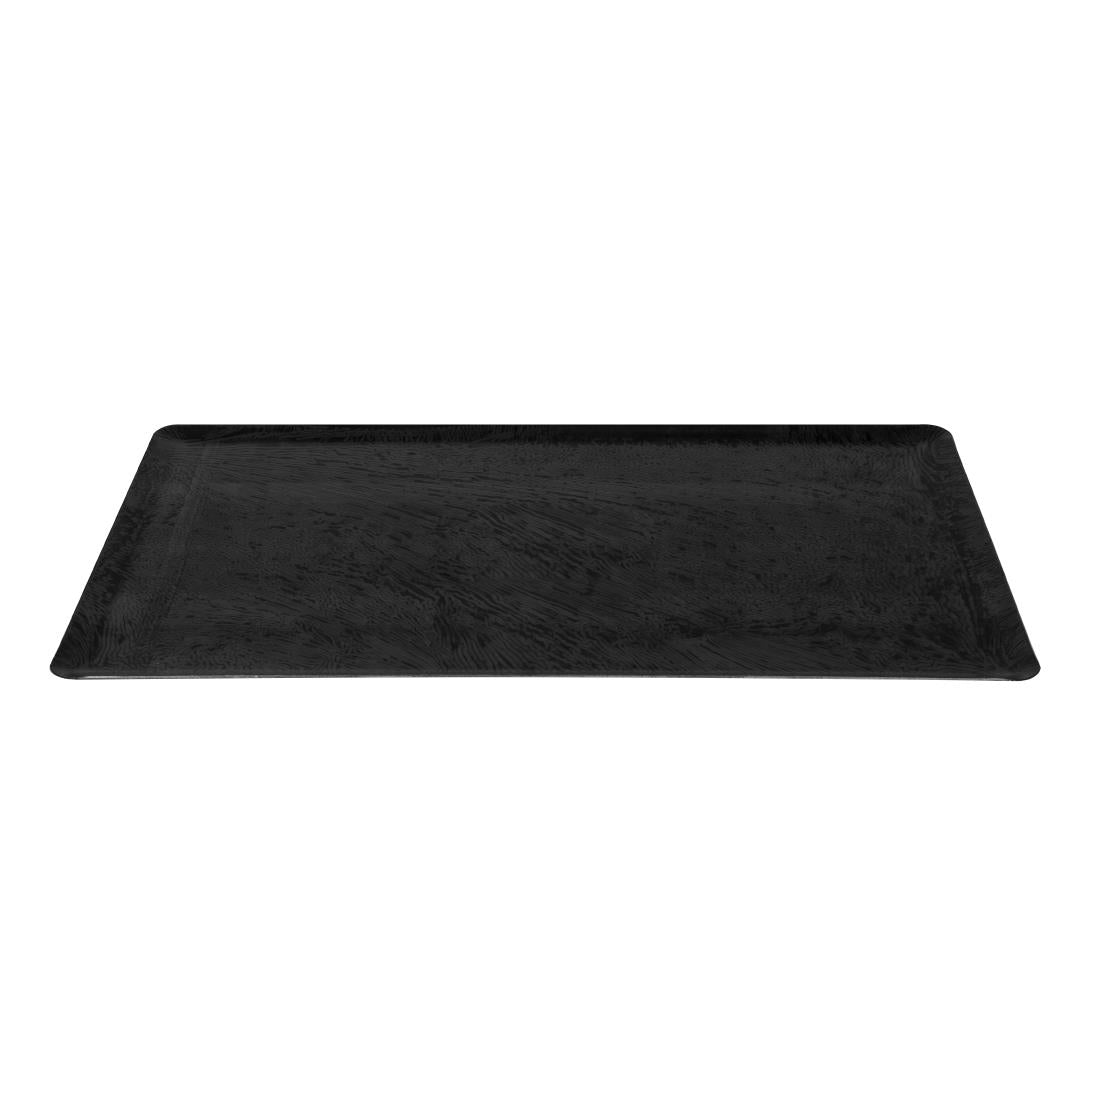 Bourgeat Blue Steel Baking Tray 530 x 325mm JD Catering Equipment Solutions Ltd